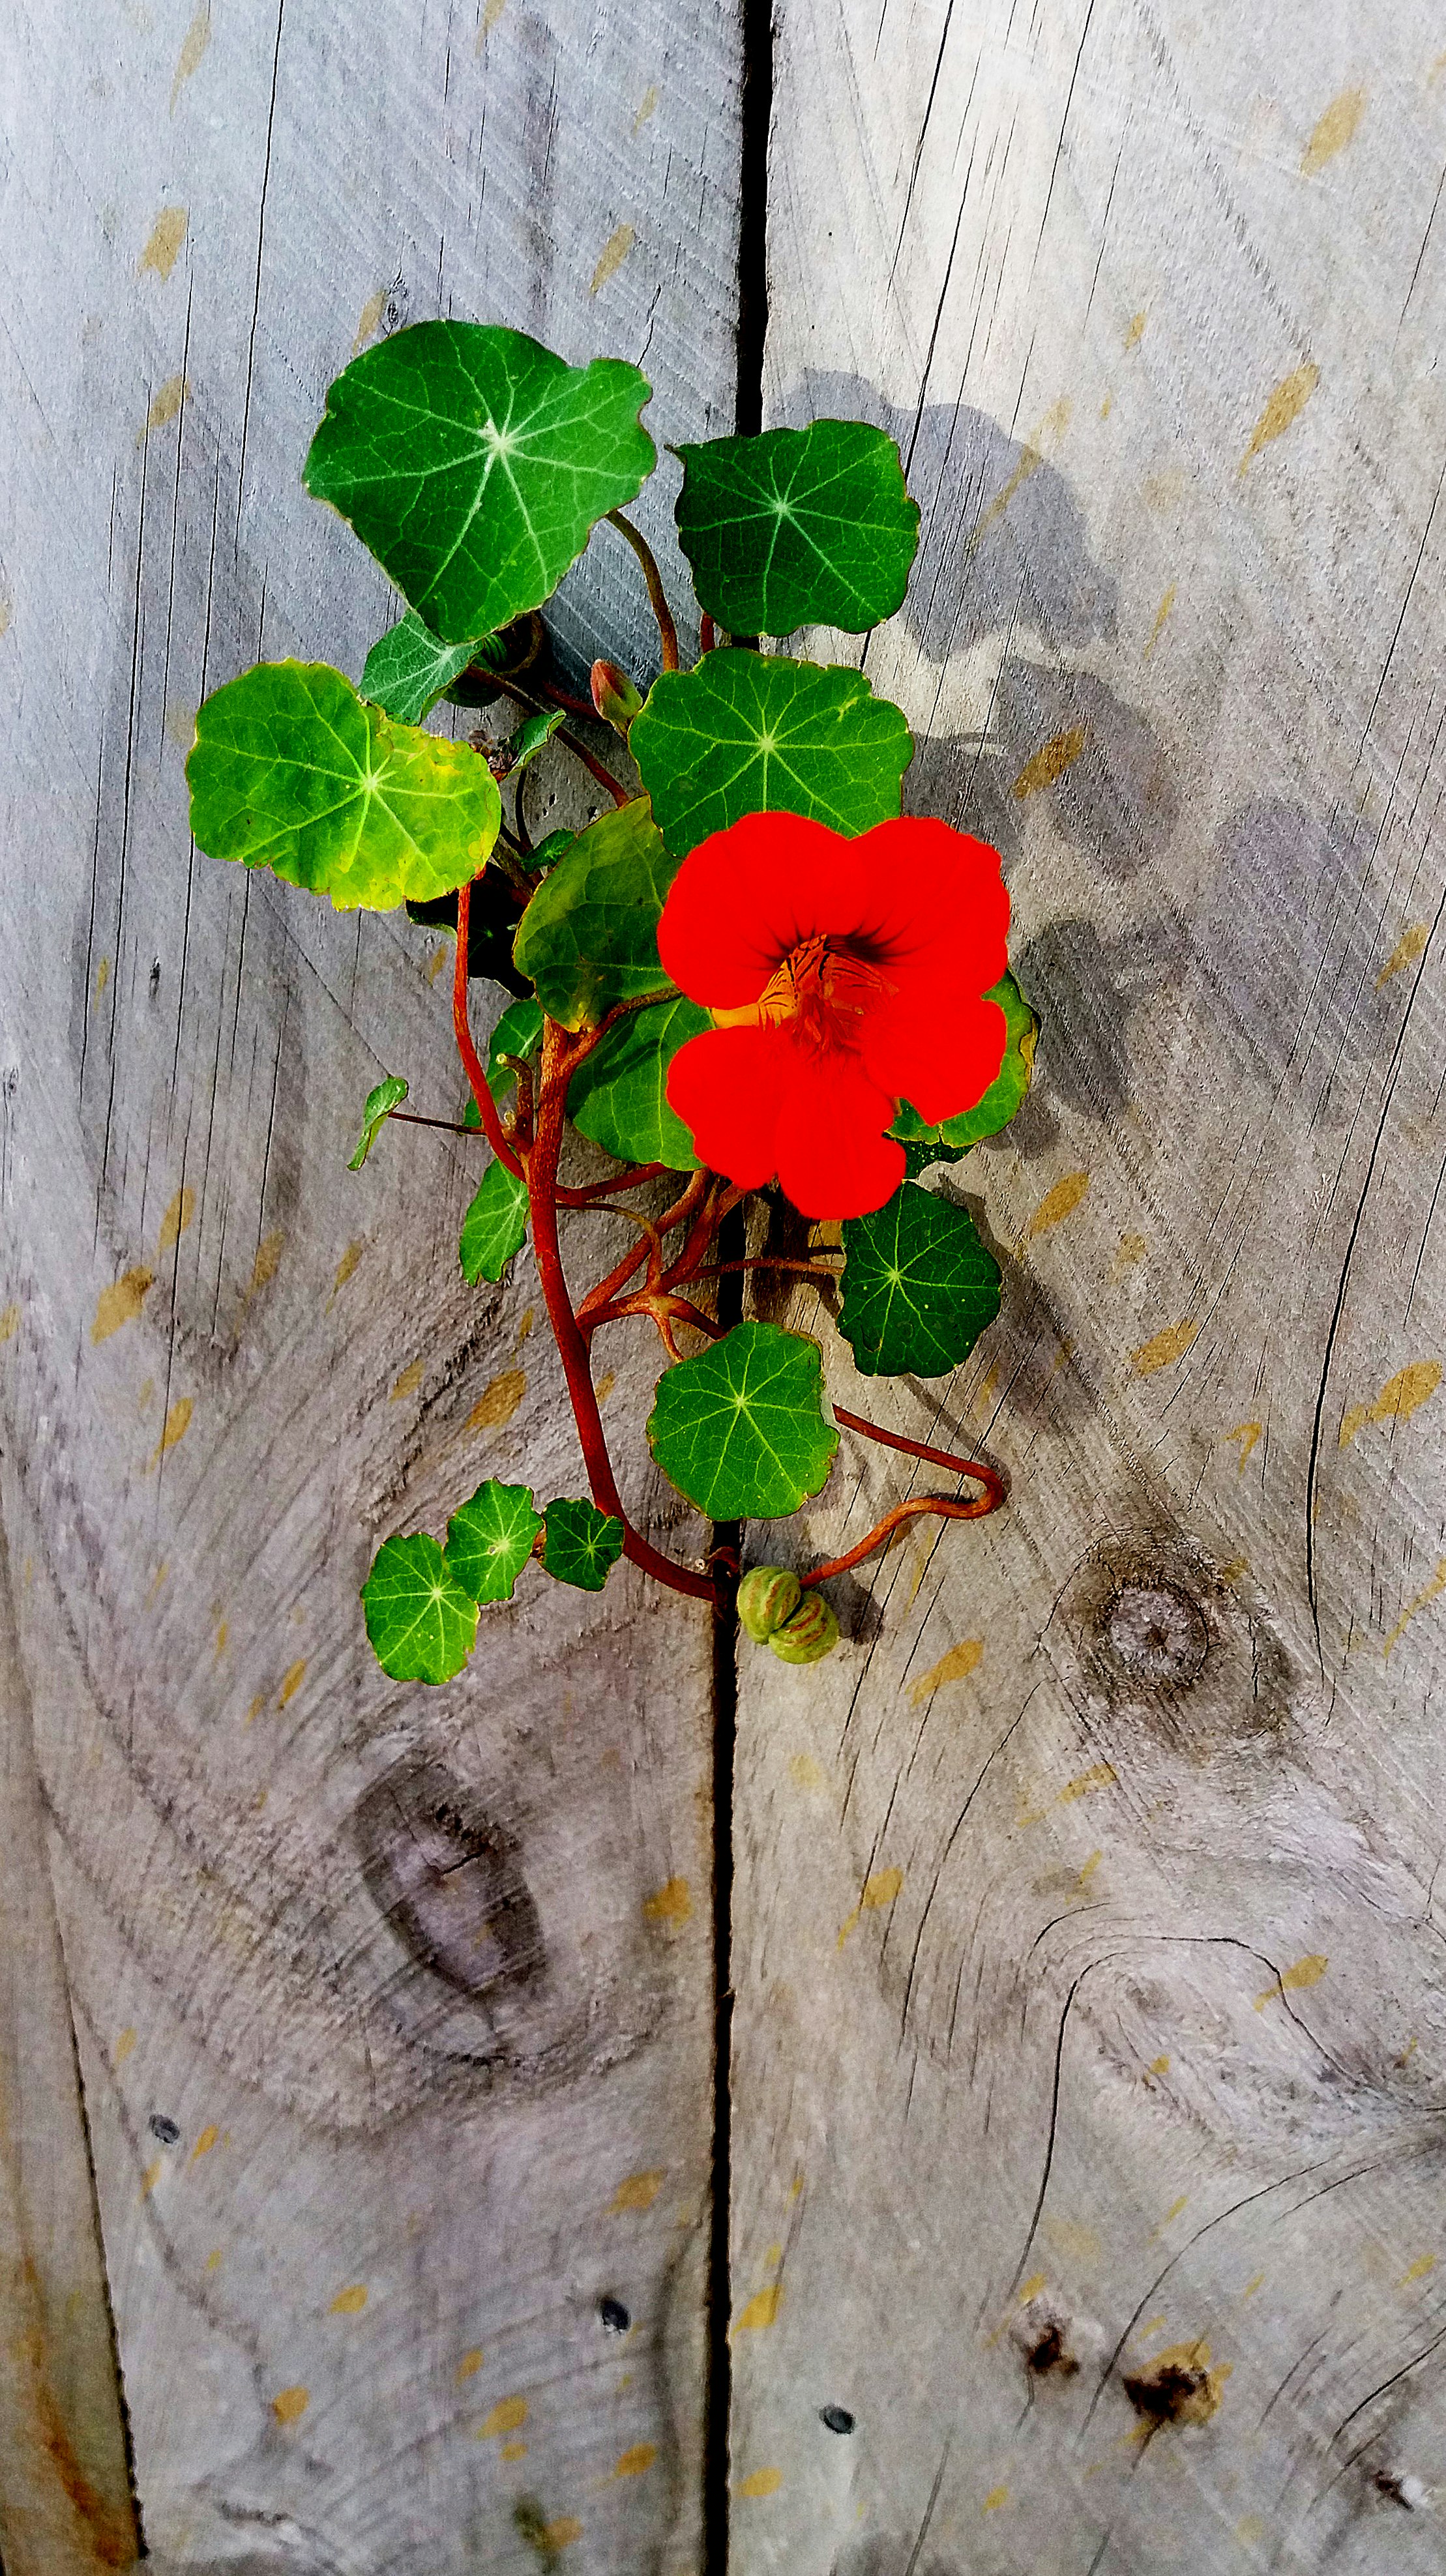 red flower on gray wooden surface